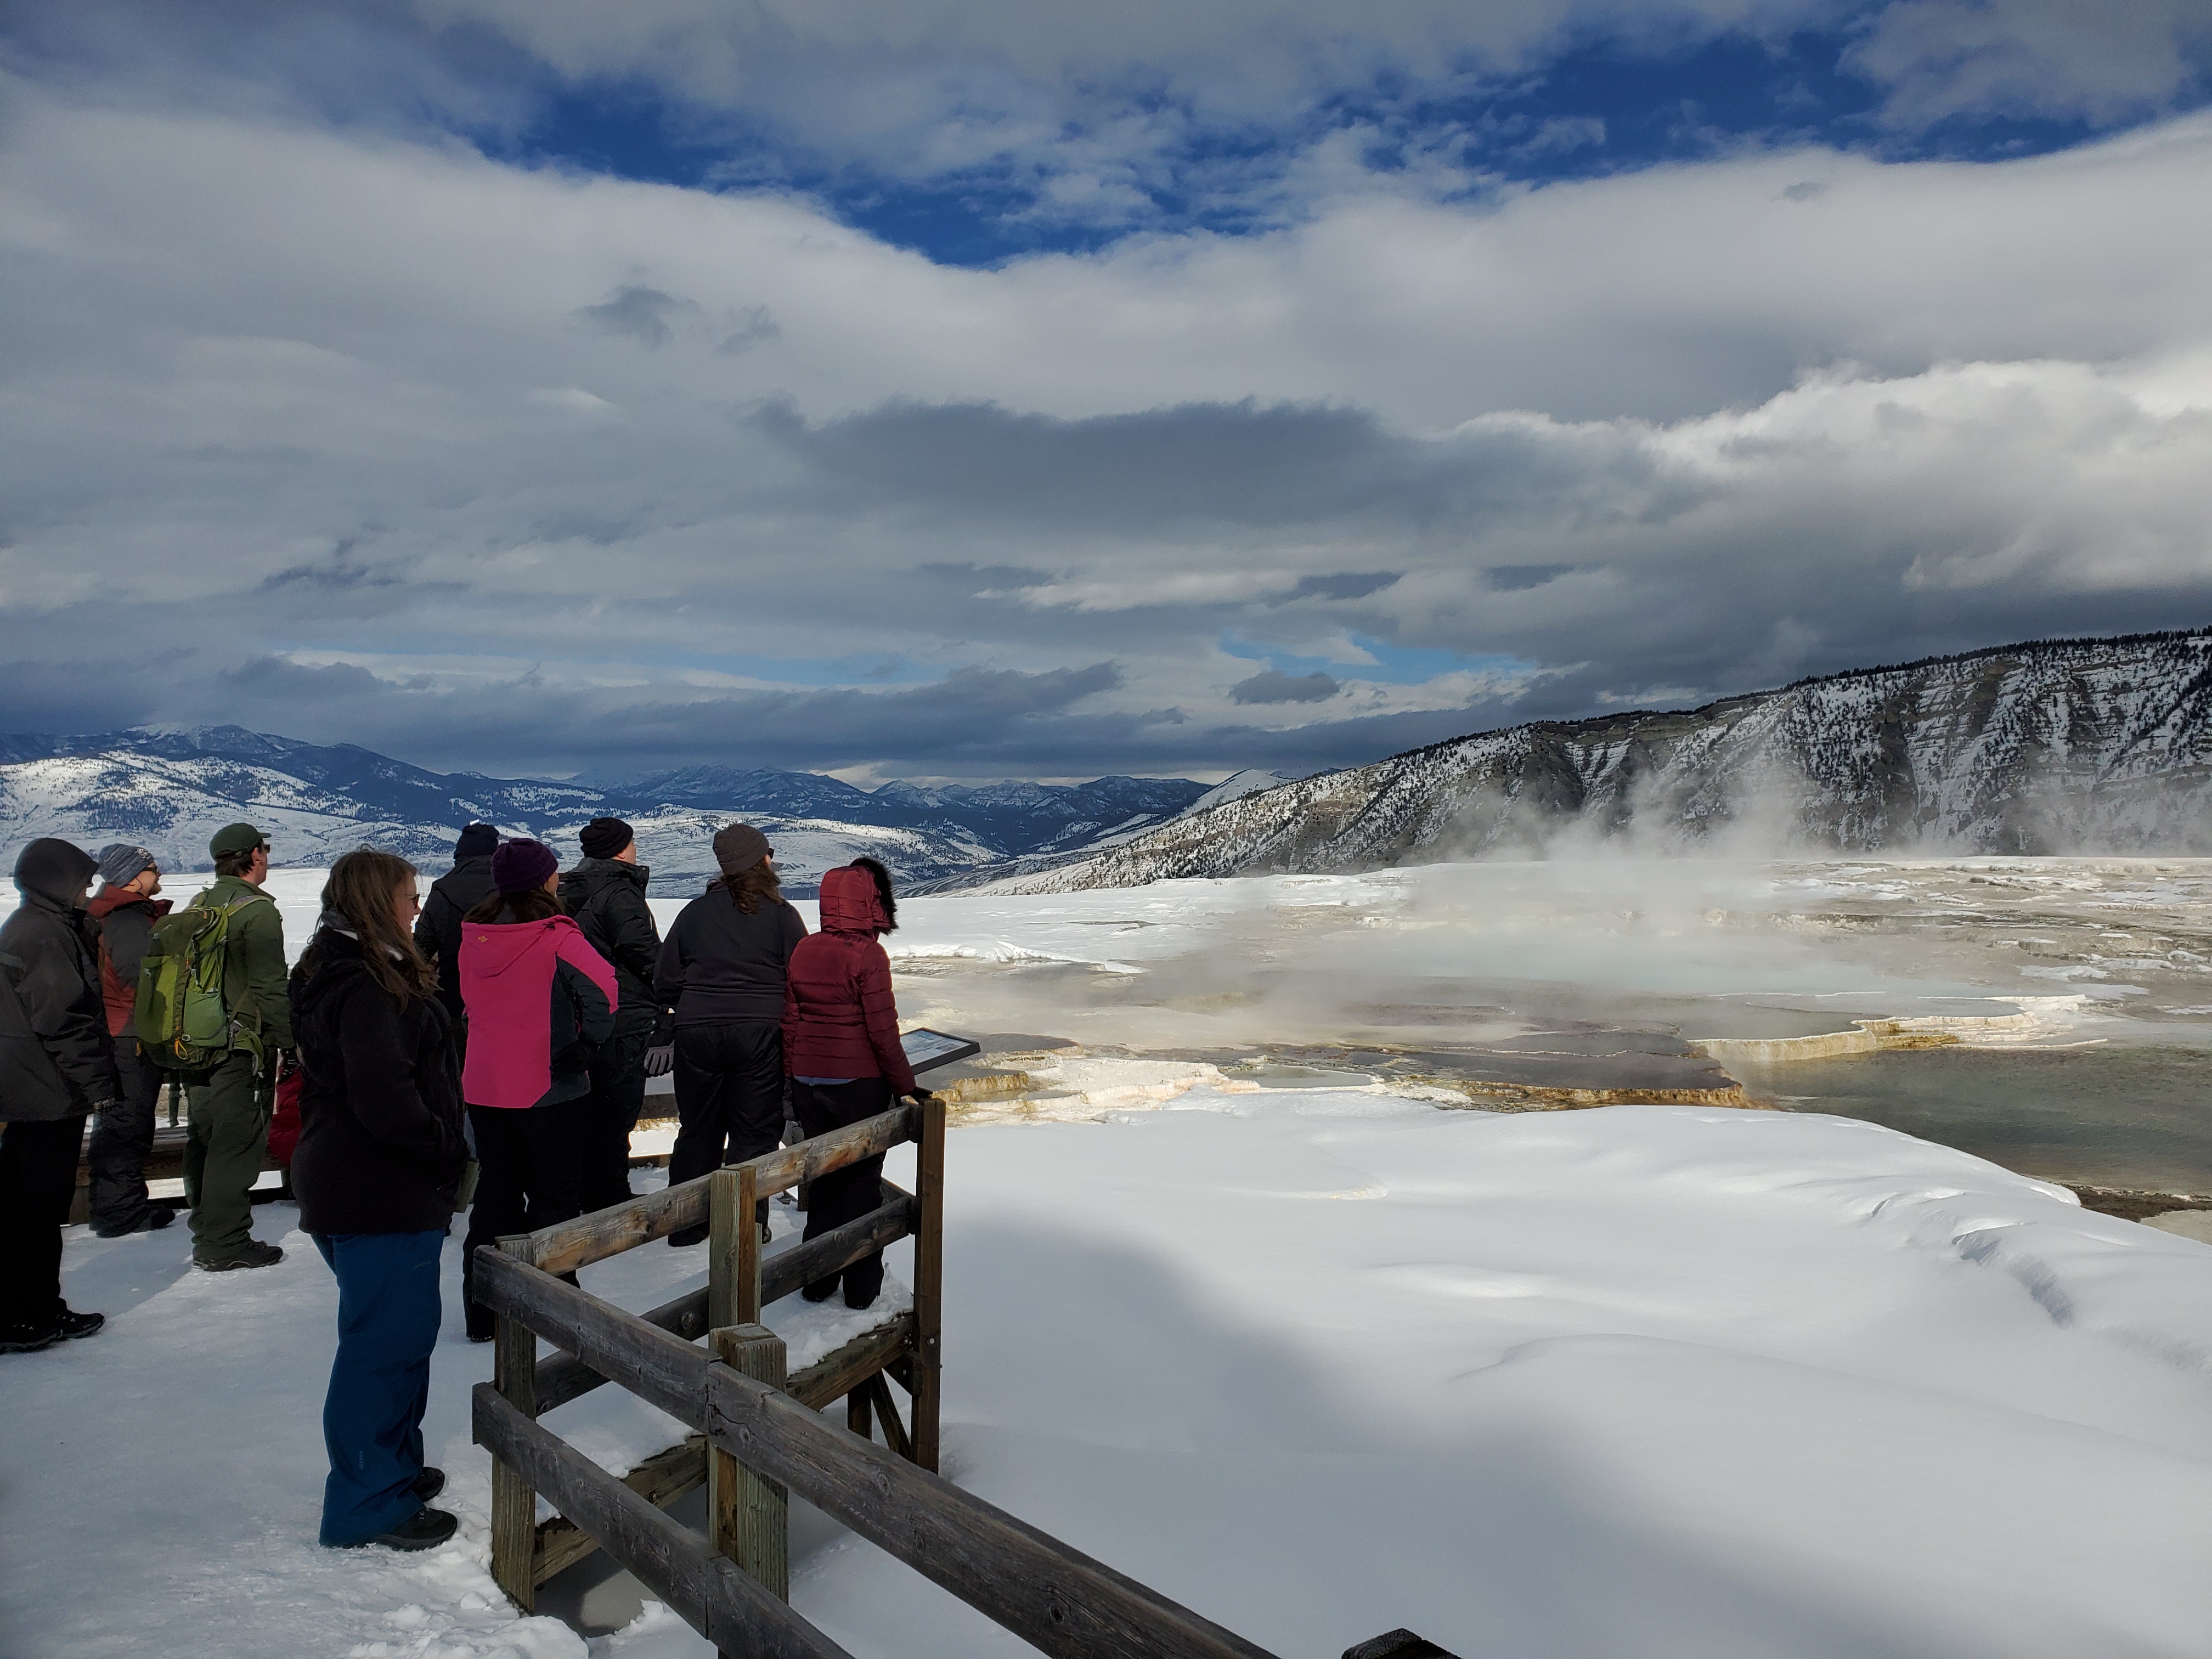 A group of people overlooking mammoth terraces